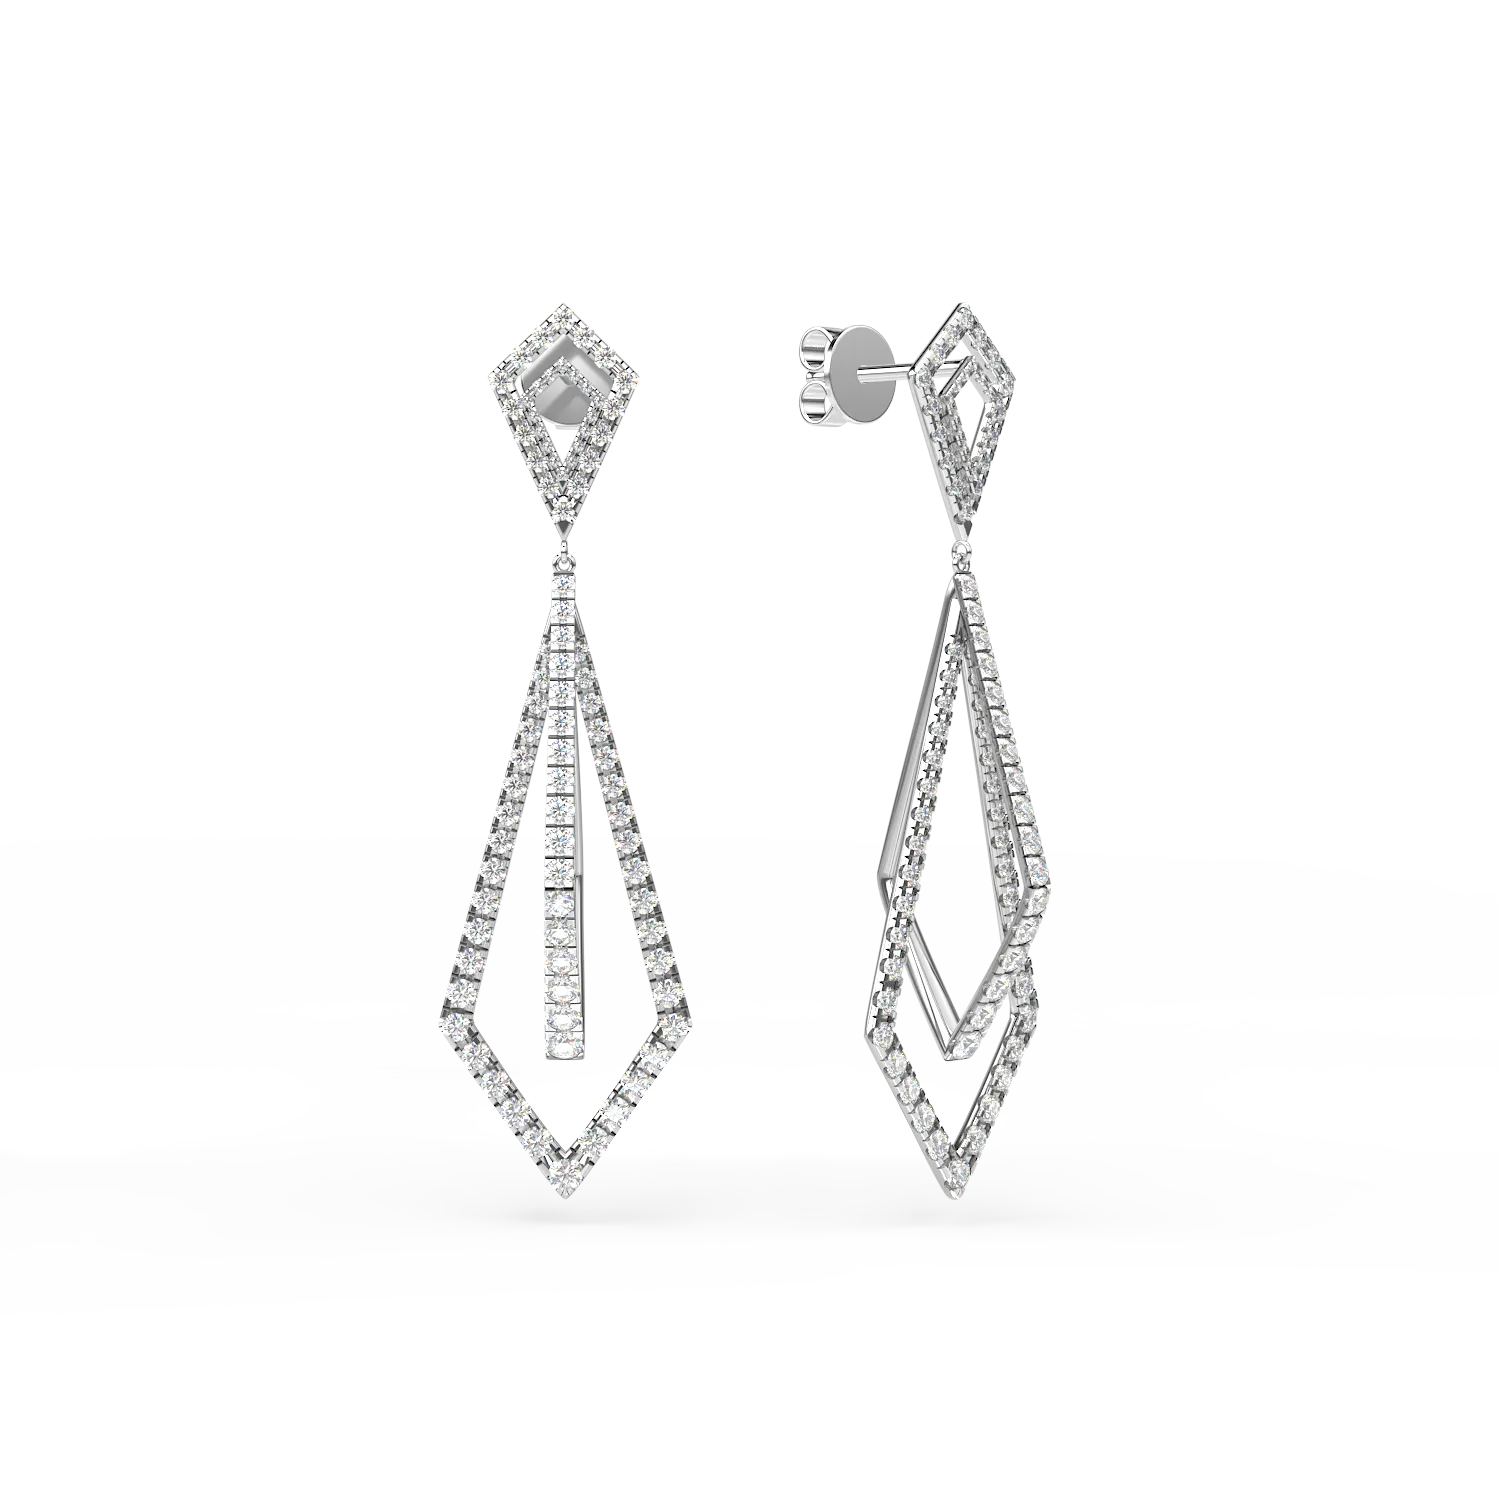 White gold earrings with 3.68ct diamonds